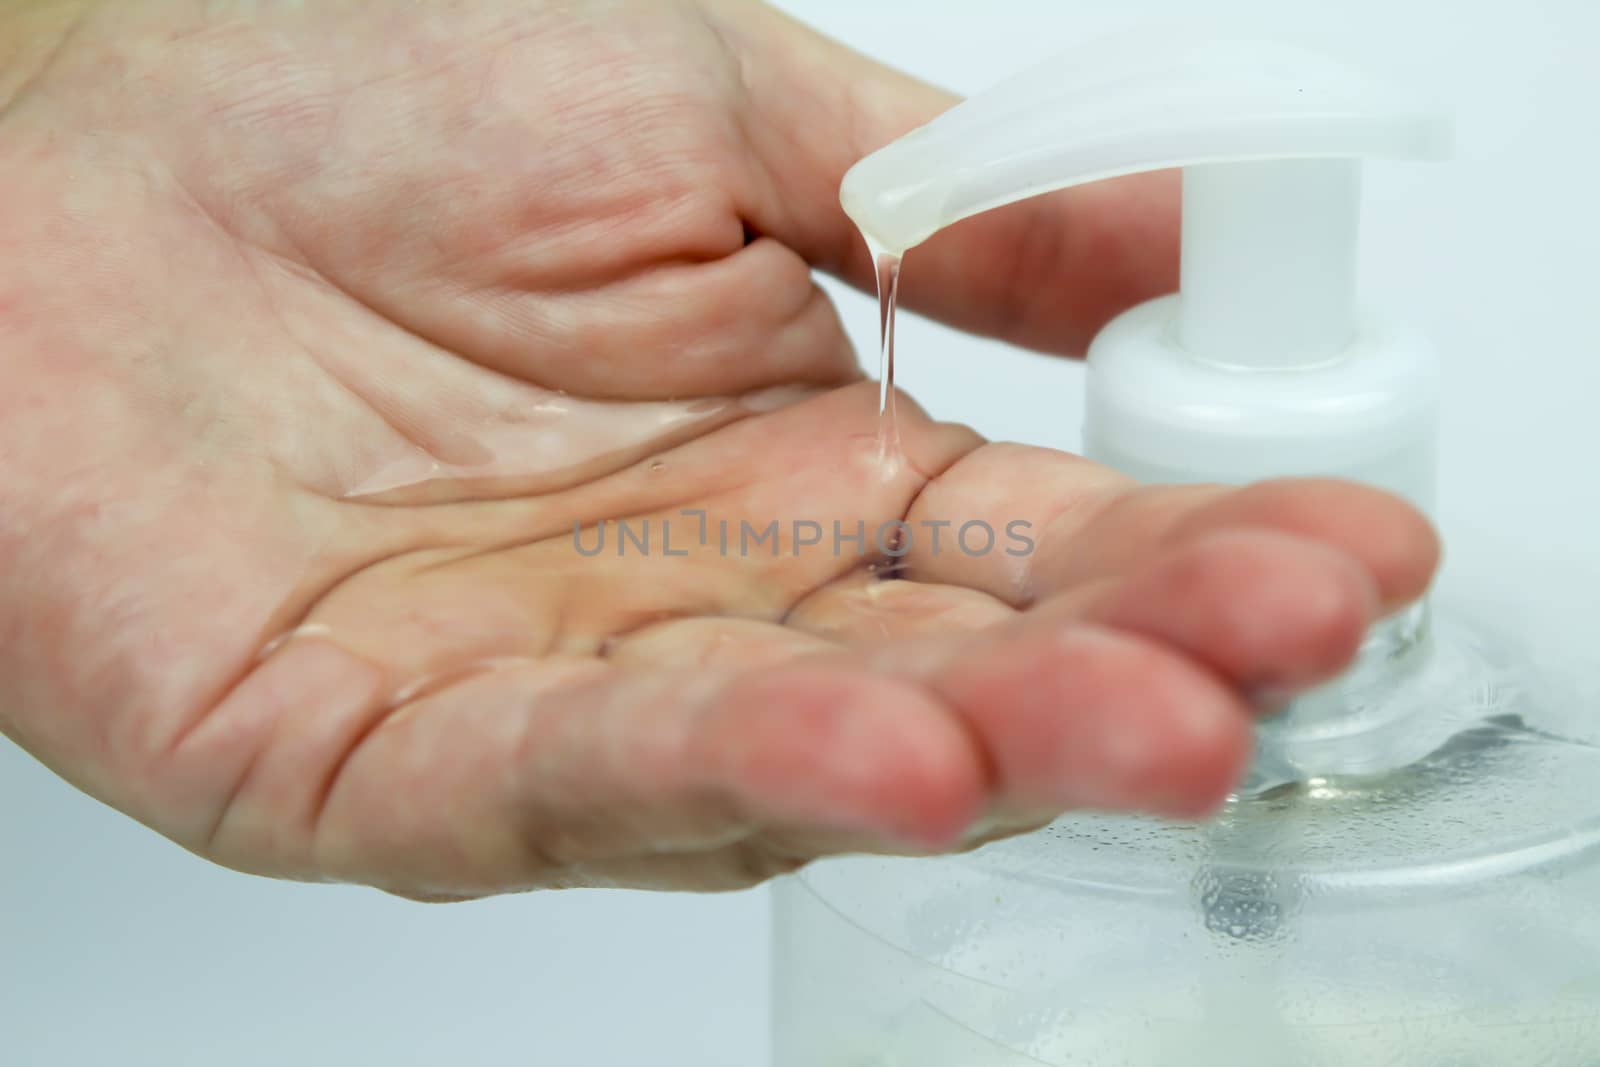 Hydroalcoholic gel bottle pouring gel into a hand on white background